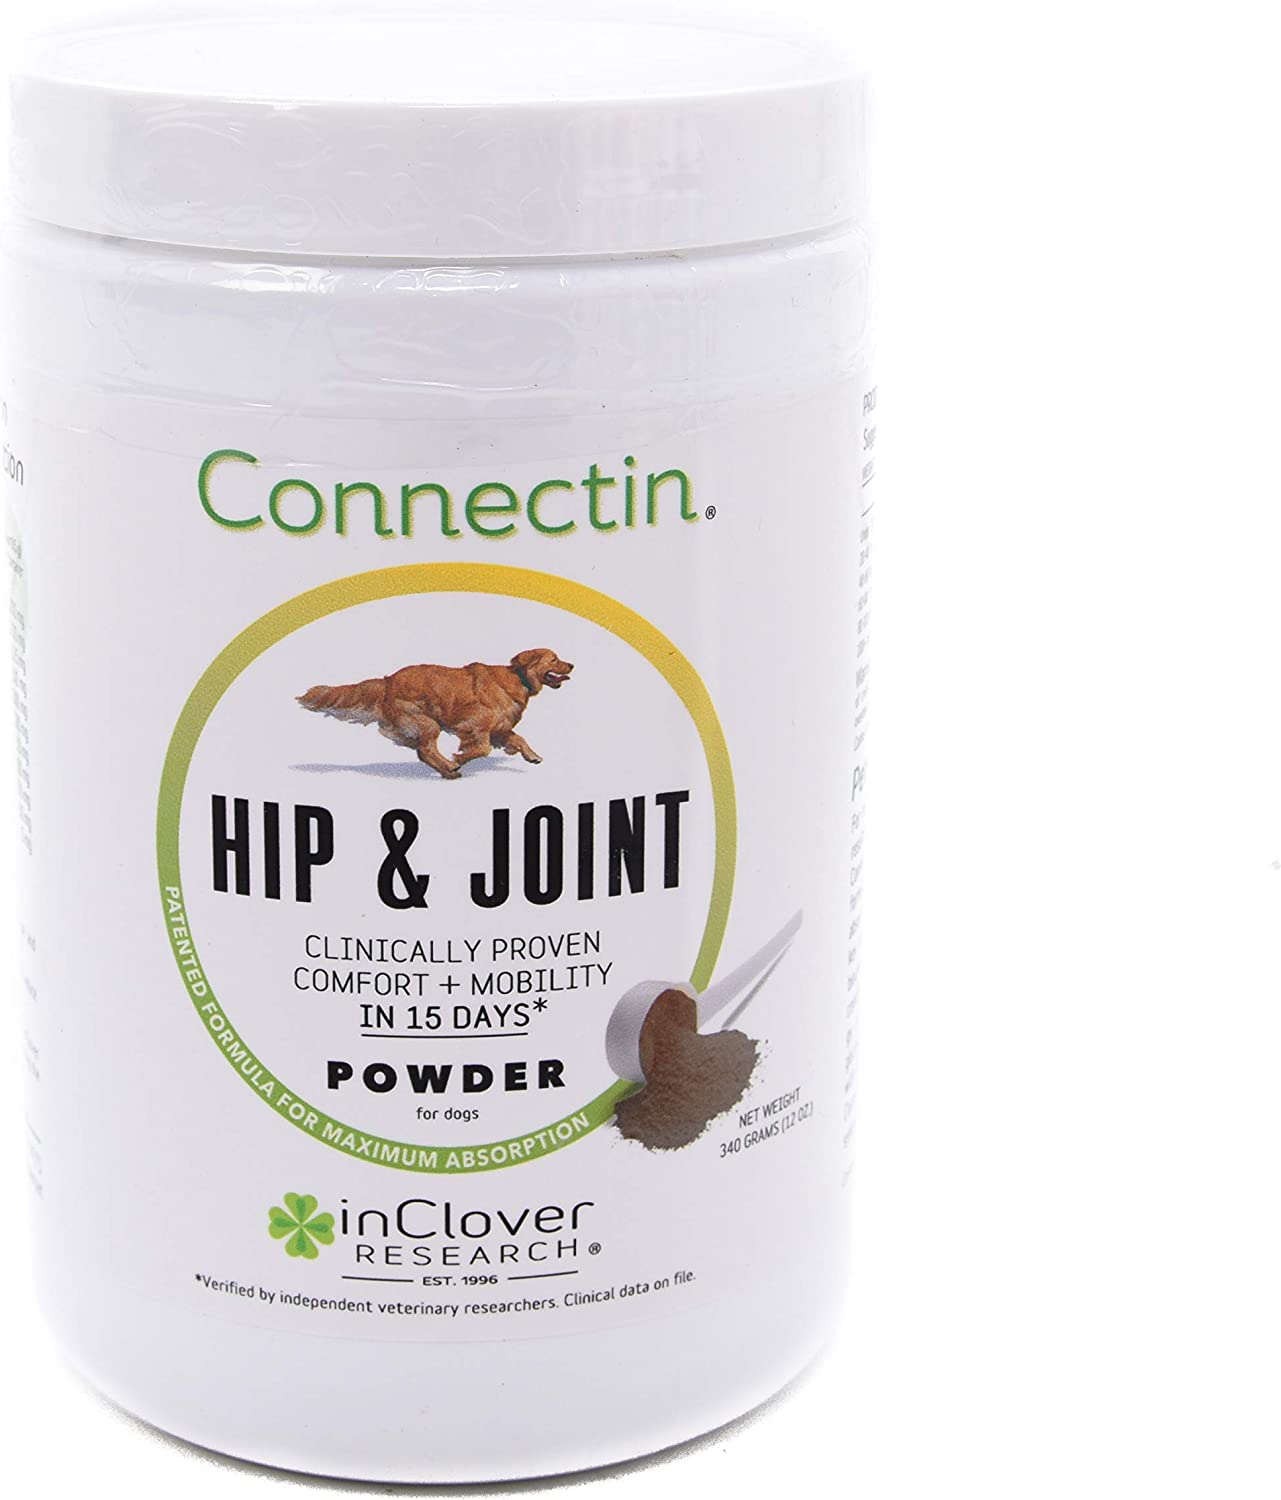 Connectin Hip & Joint Powder for Dogs